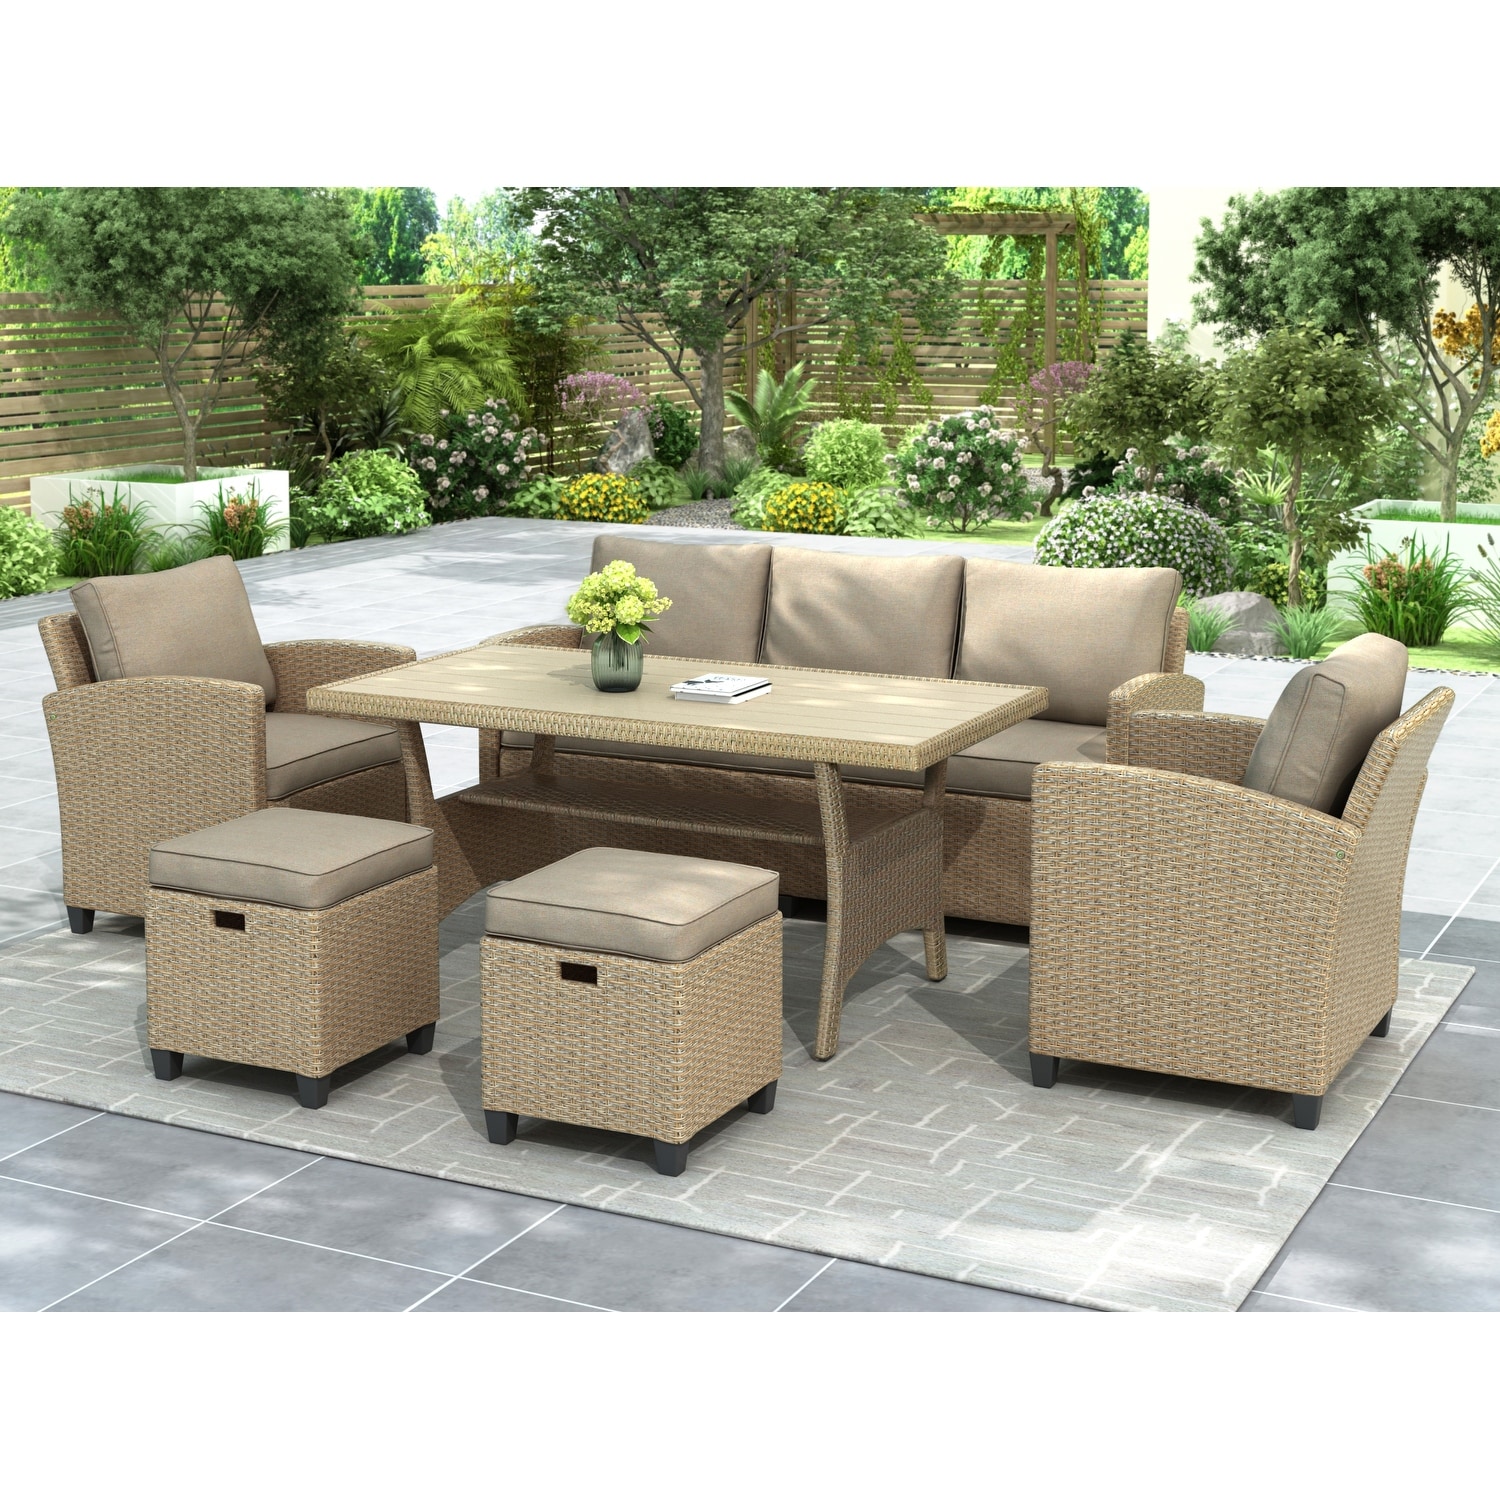 6-pieces Outdoor Garden Patio Furniture Sets For 5-7  Pe Rattan Wicker Sectional Cushioned Sofa Sets For Terraces  Garden and Yard